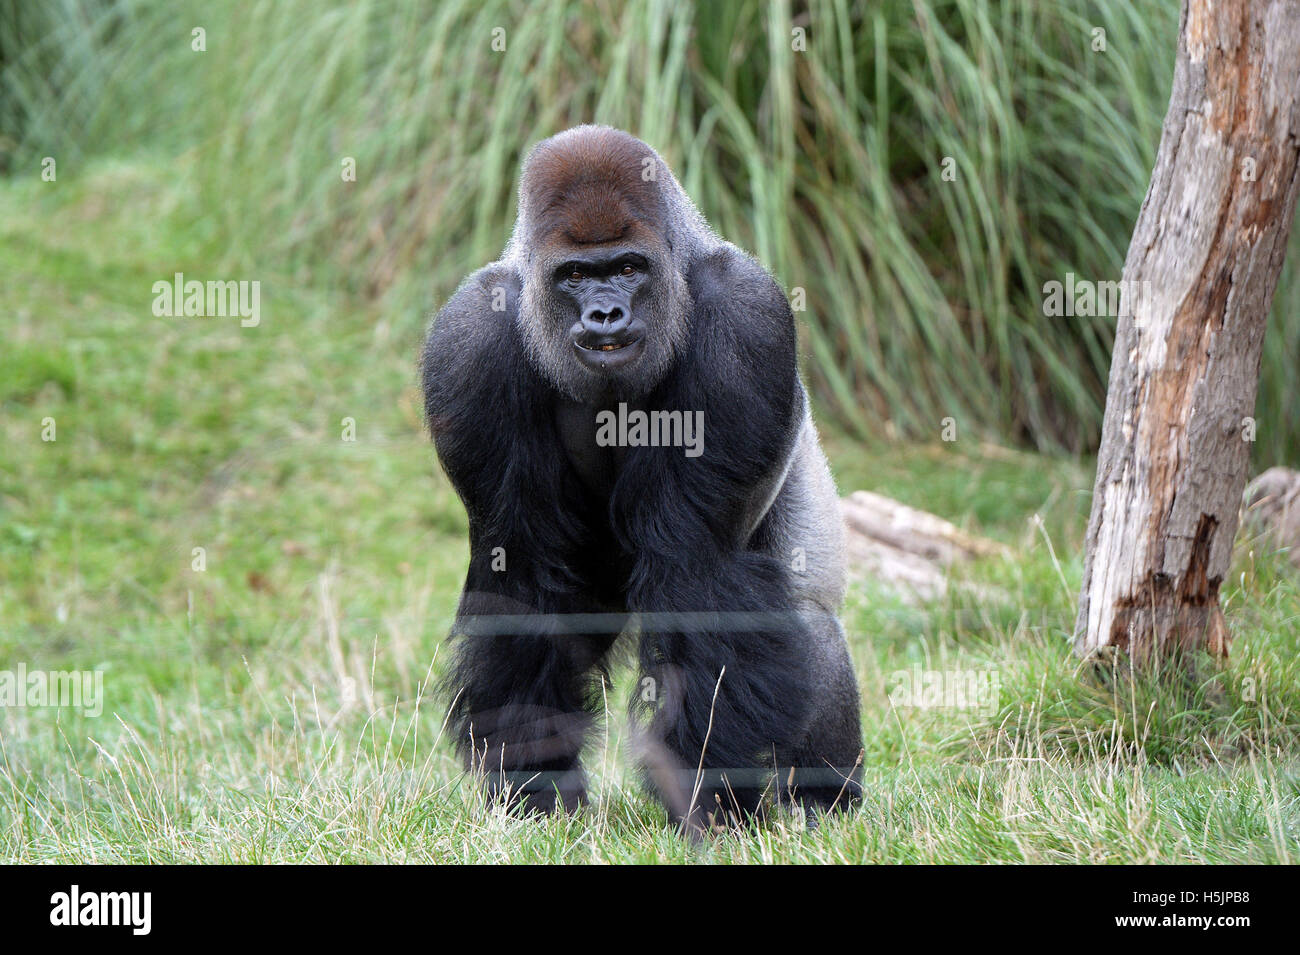 Silverback gorilla, Kumbuka, in his enclosure at ZSL London Zoo following his 'opportunistic' escape through two unlocked doors into a corridor where a keeper was working on October 13. Stock Photo